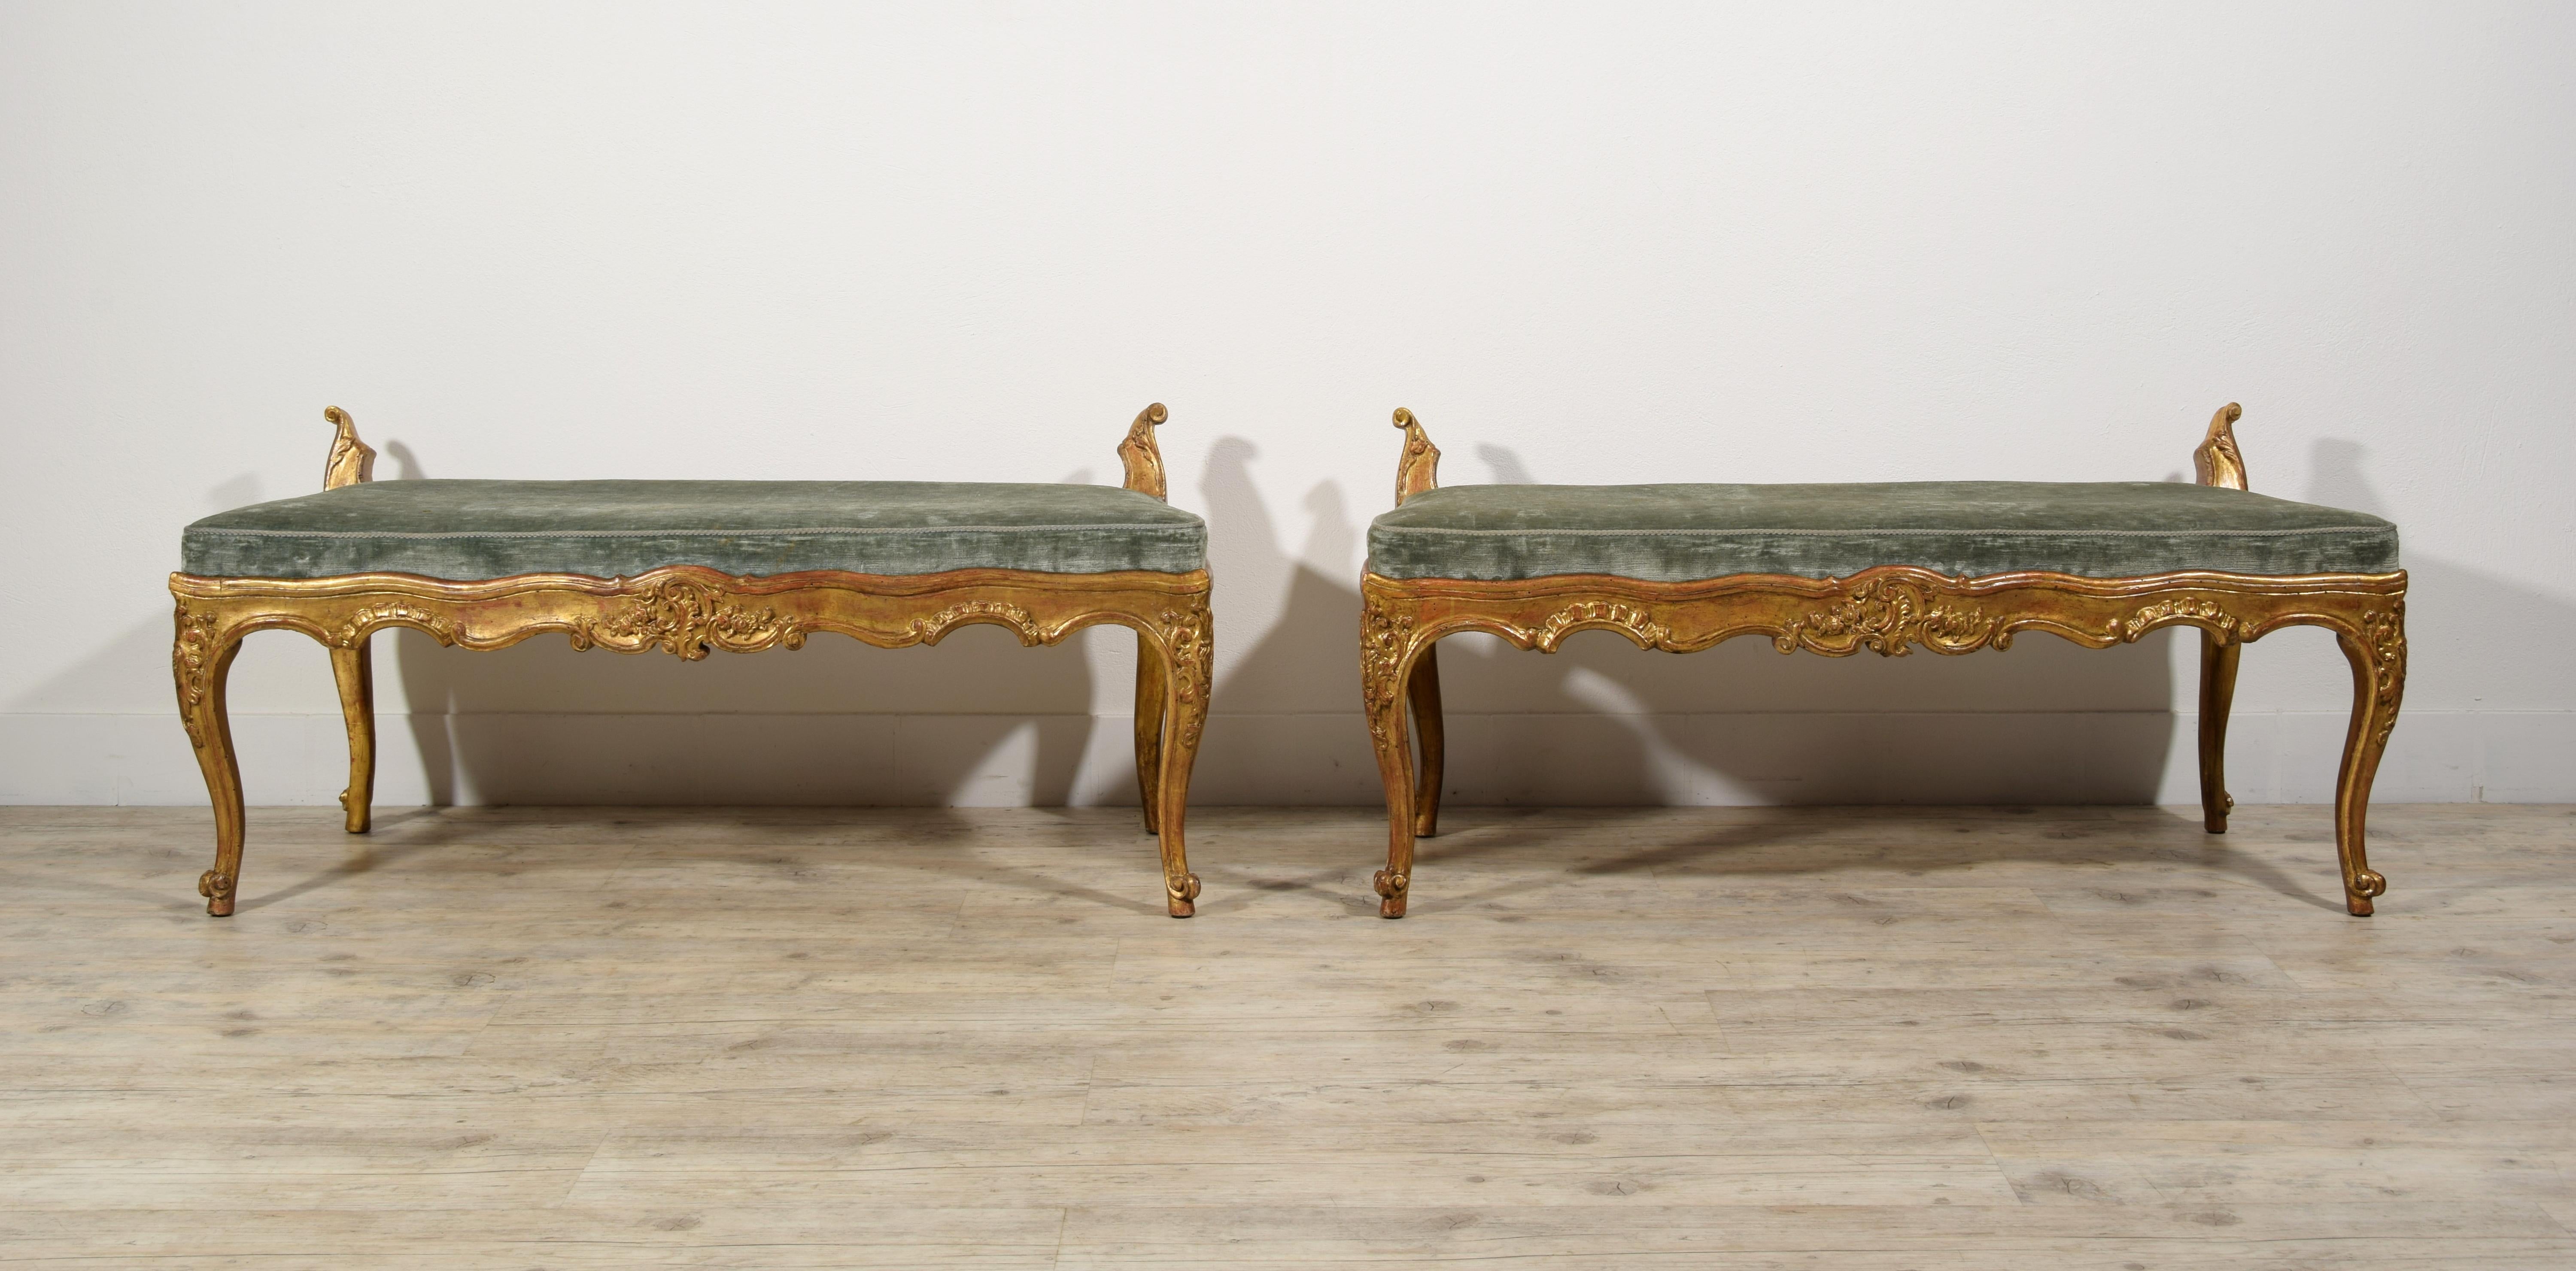 Rococo 18th Century, Pair of Italian Rococò Carved Giltwood Benches  For Sale